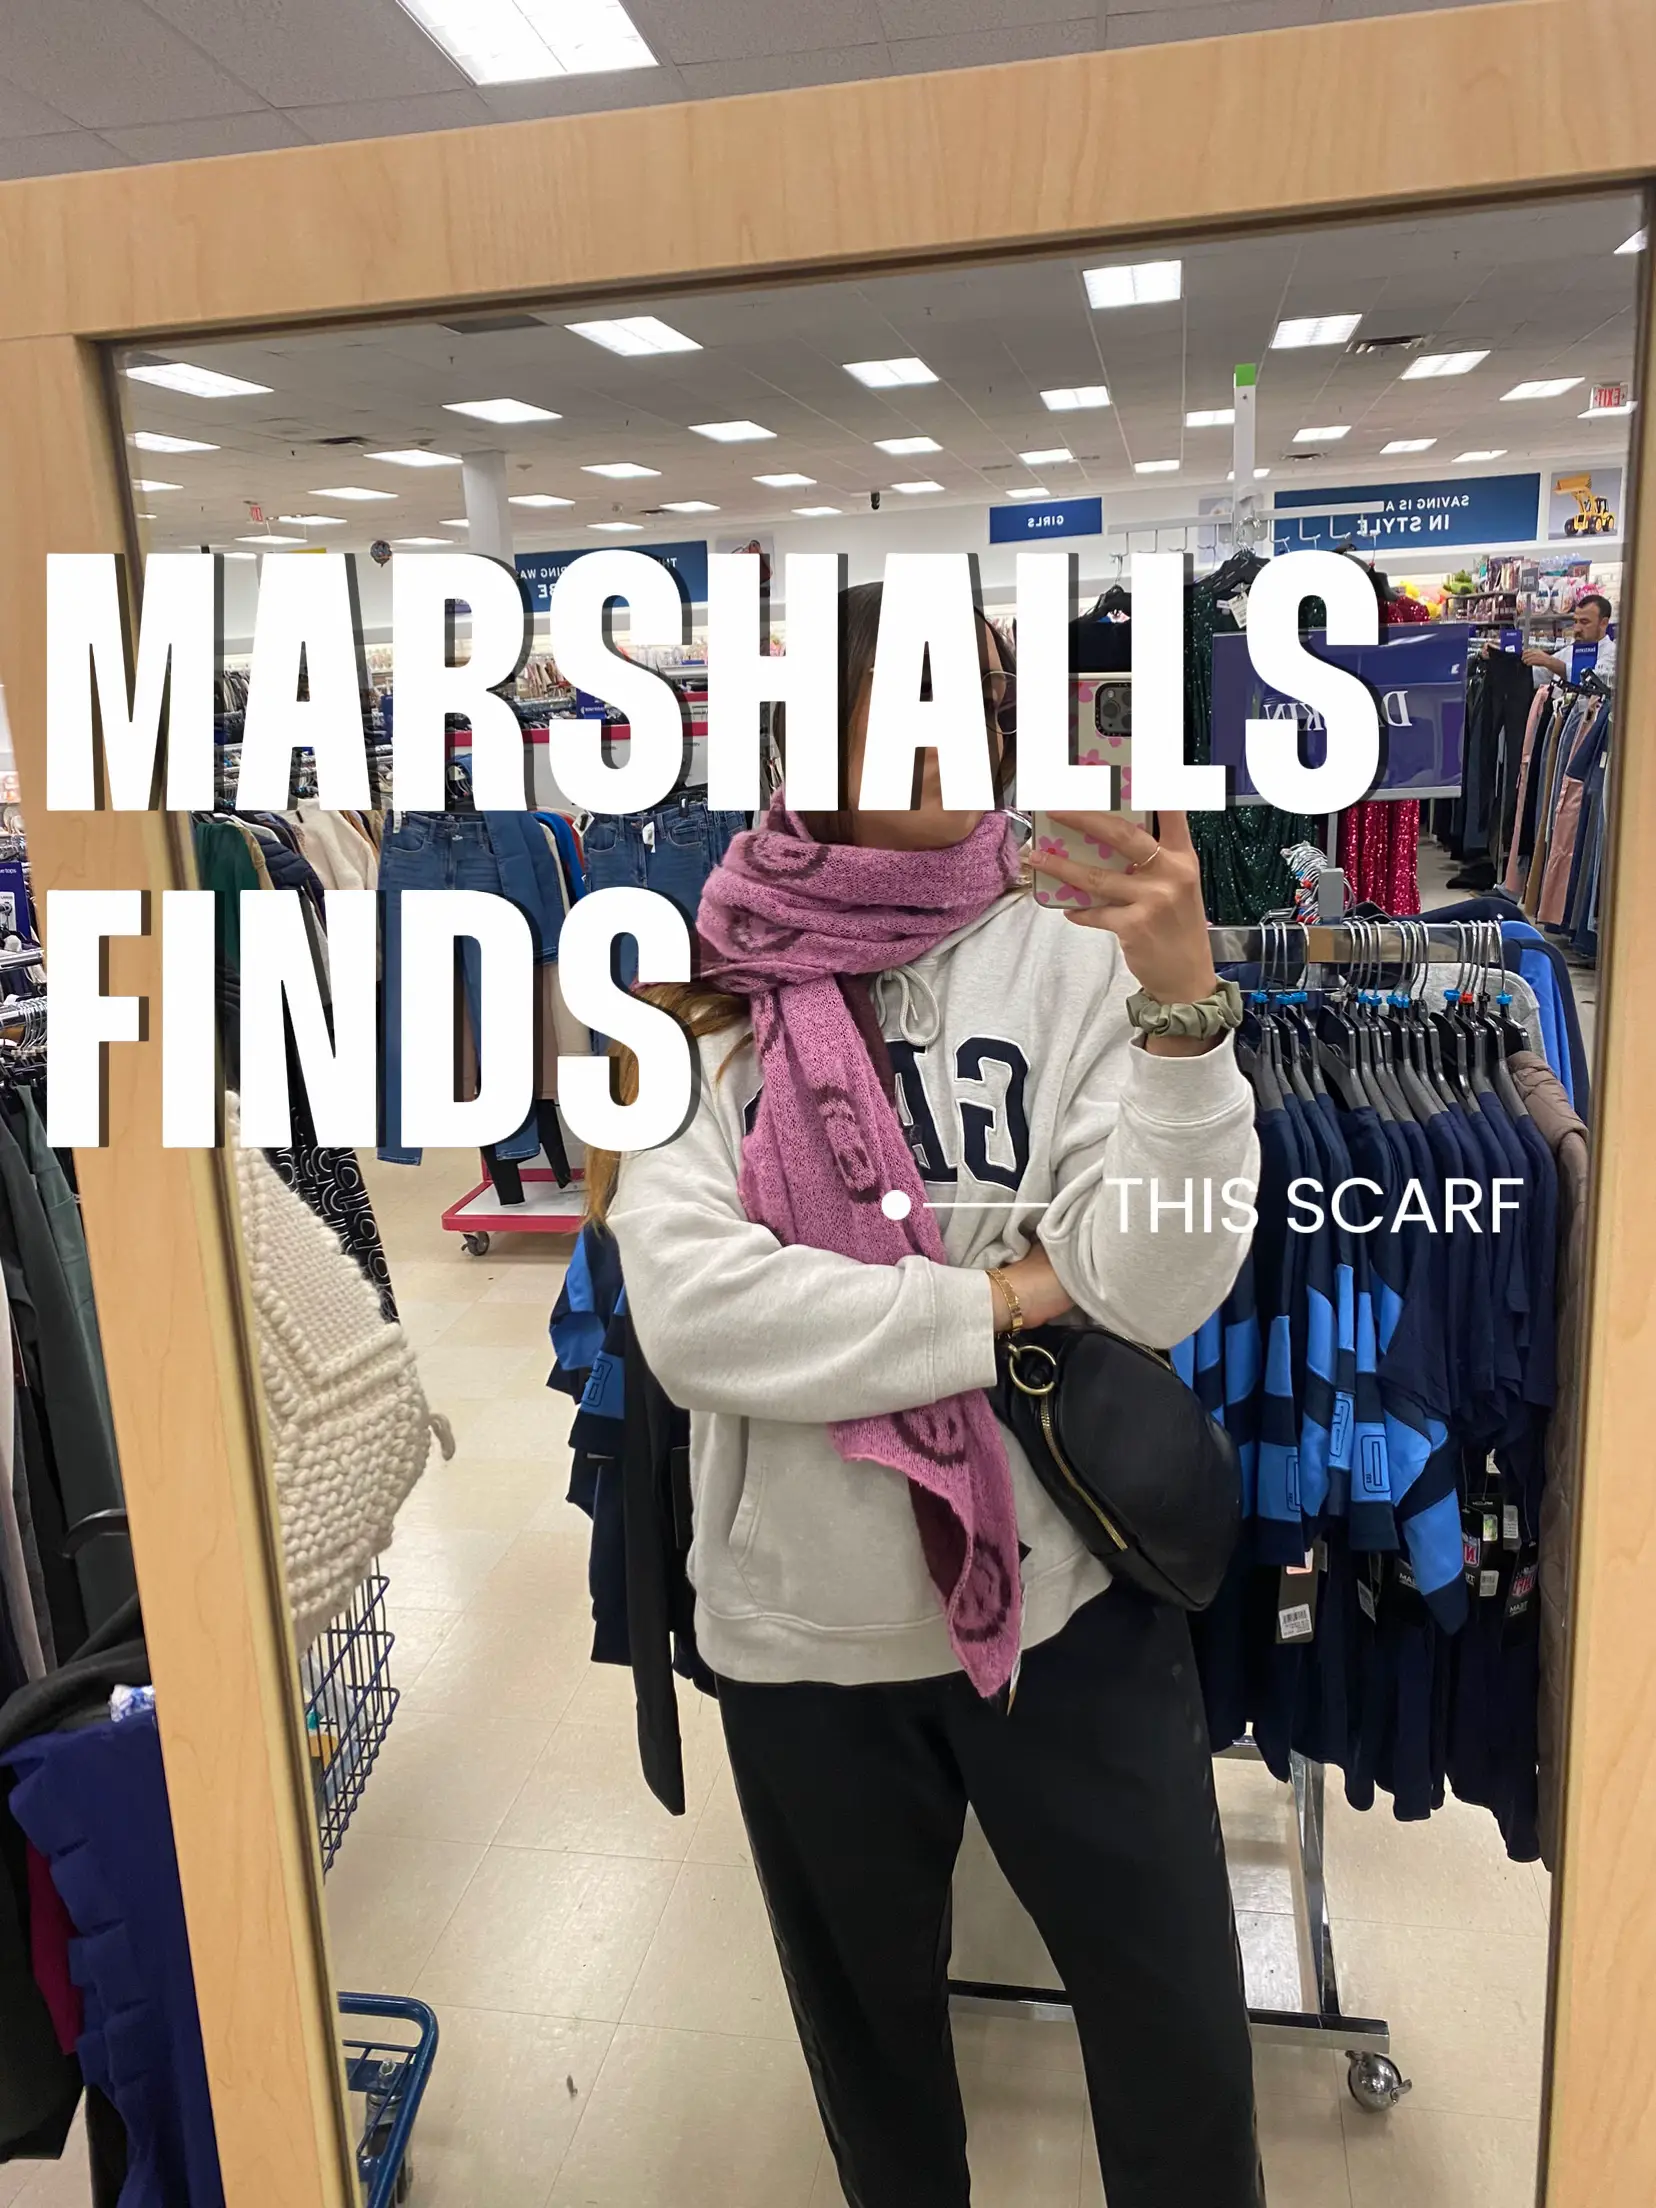 Marshalls Finds 🖤, Gallery posted by AshleyMar 🖤